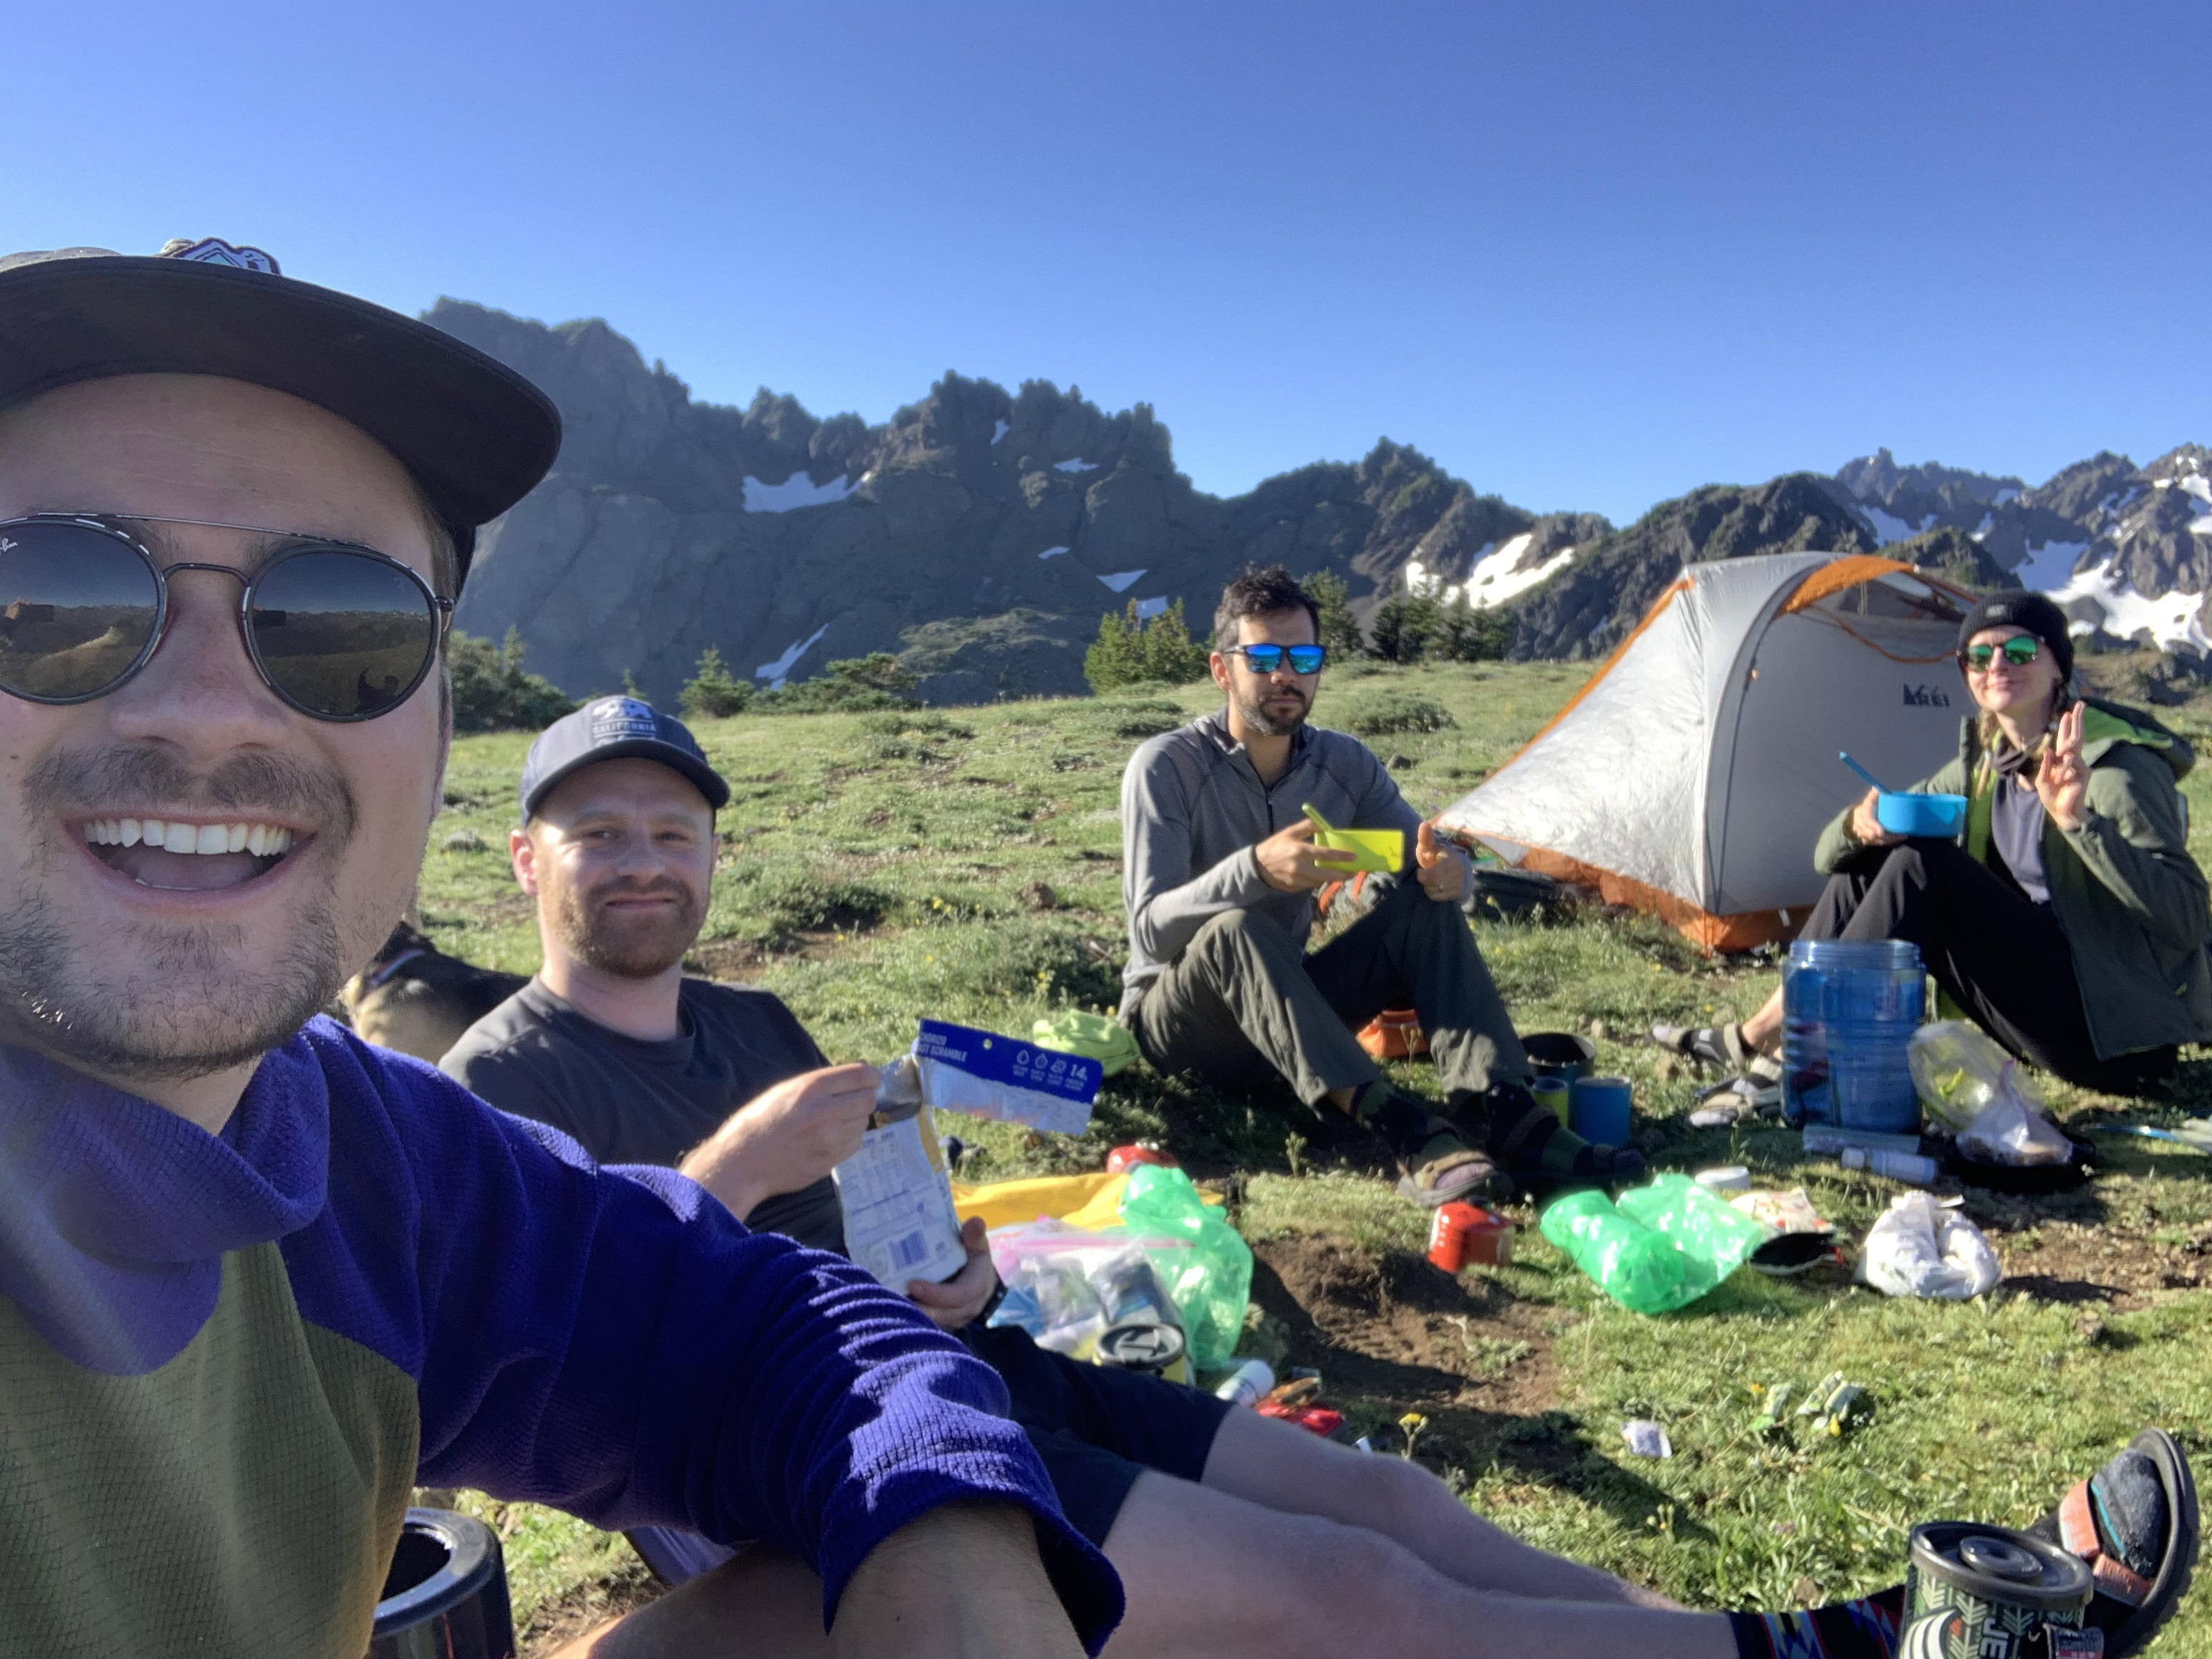 Leave no trace camping